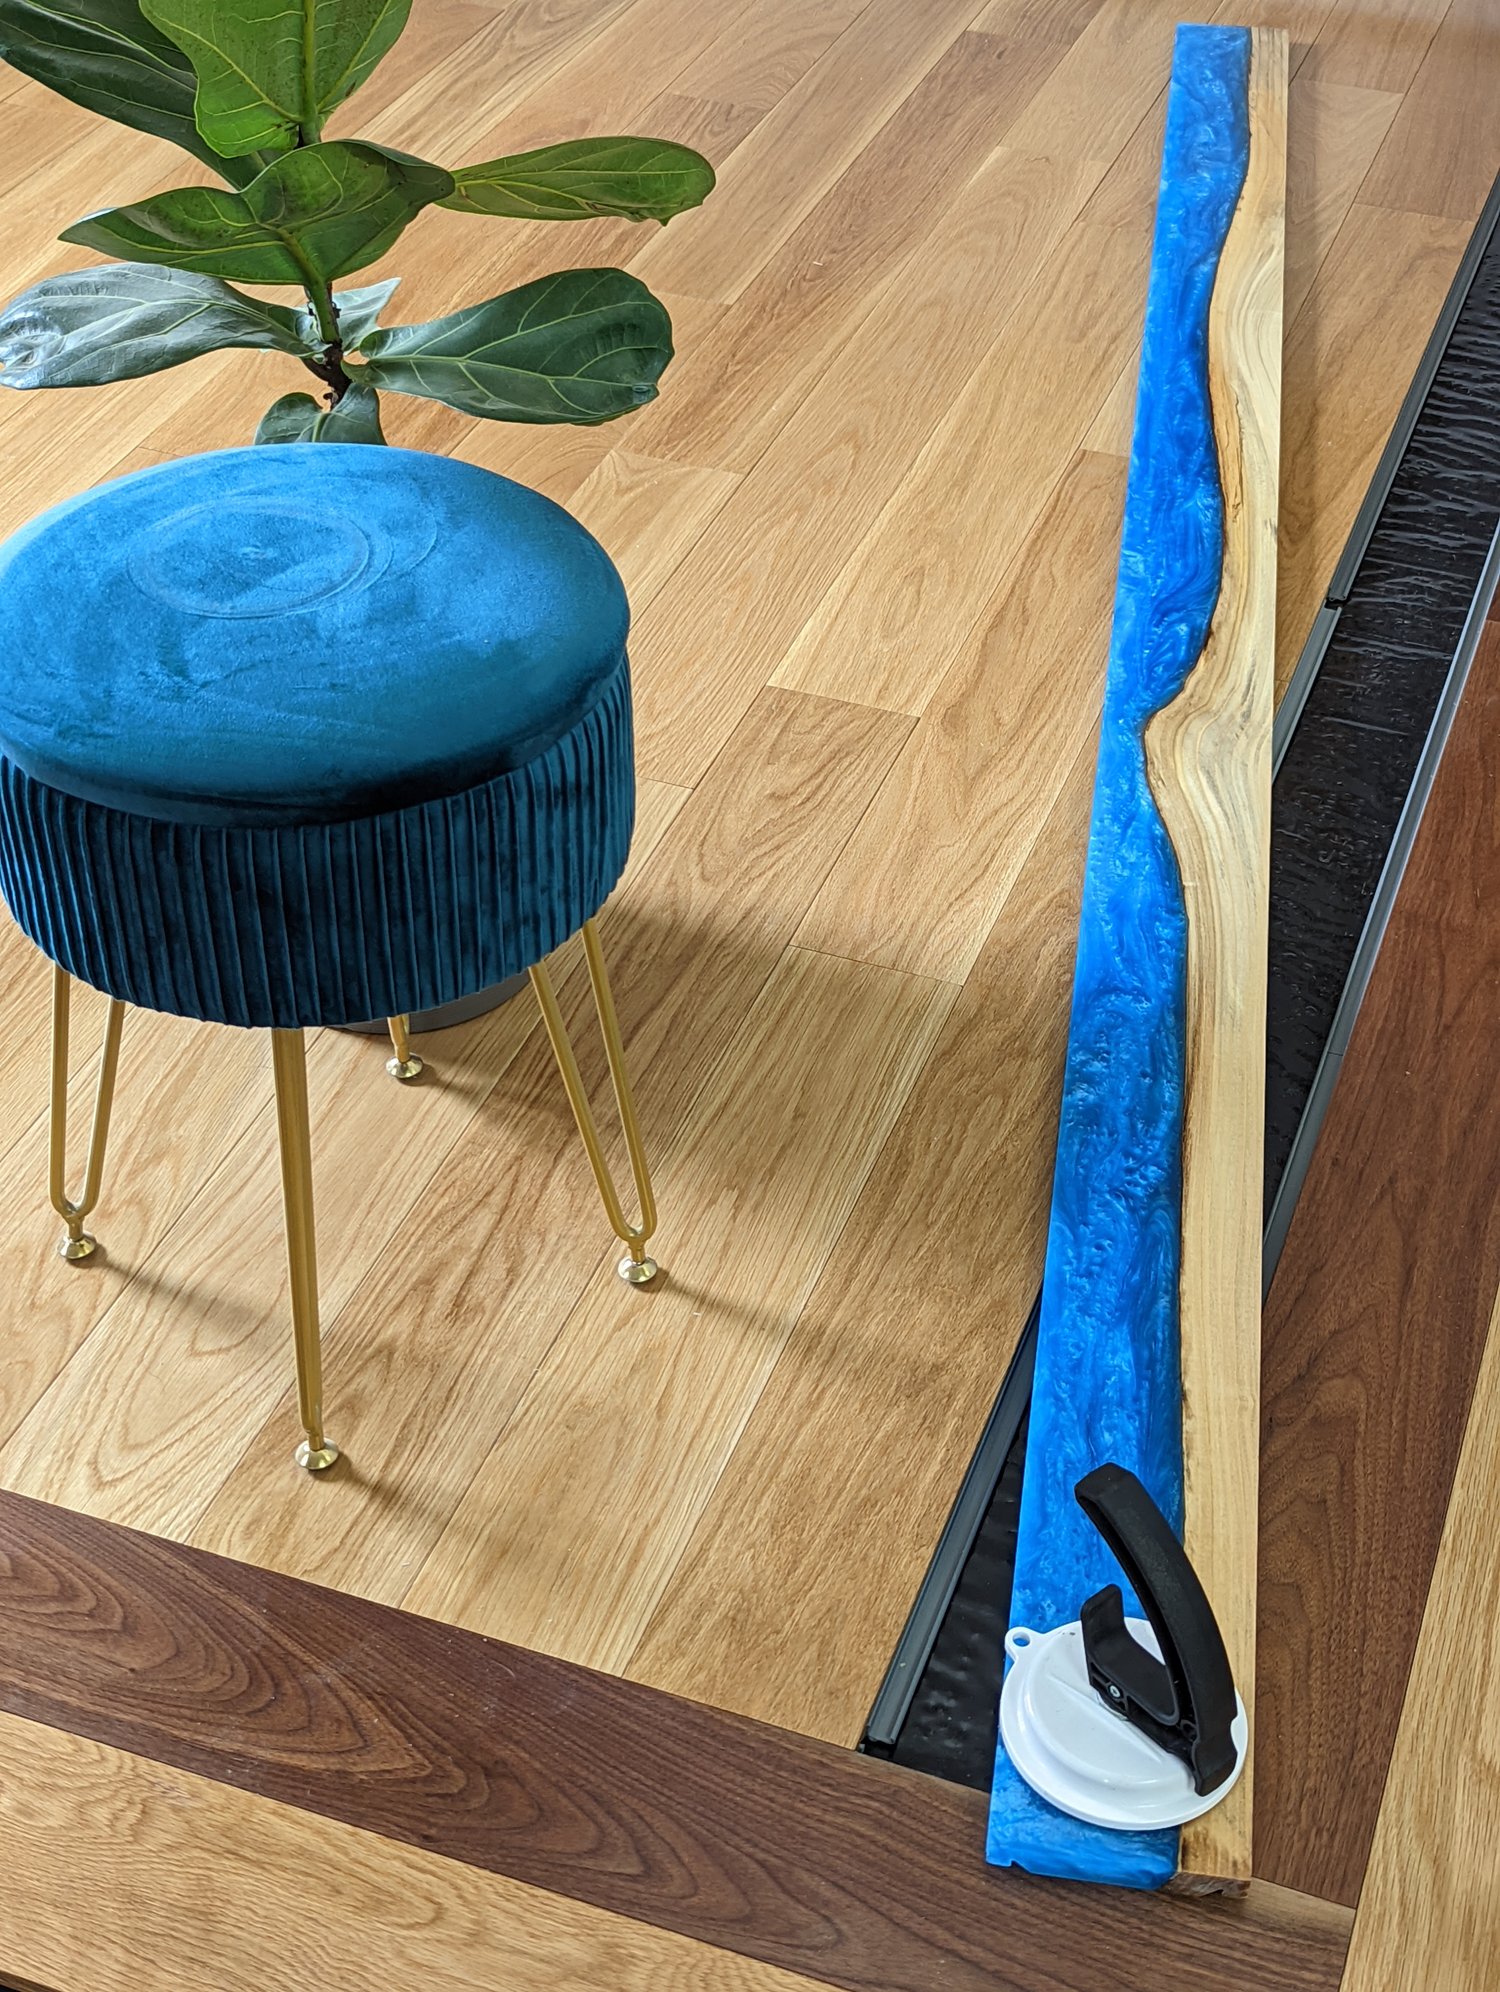 Statement floors are flexible with Steller